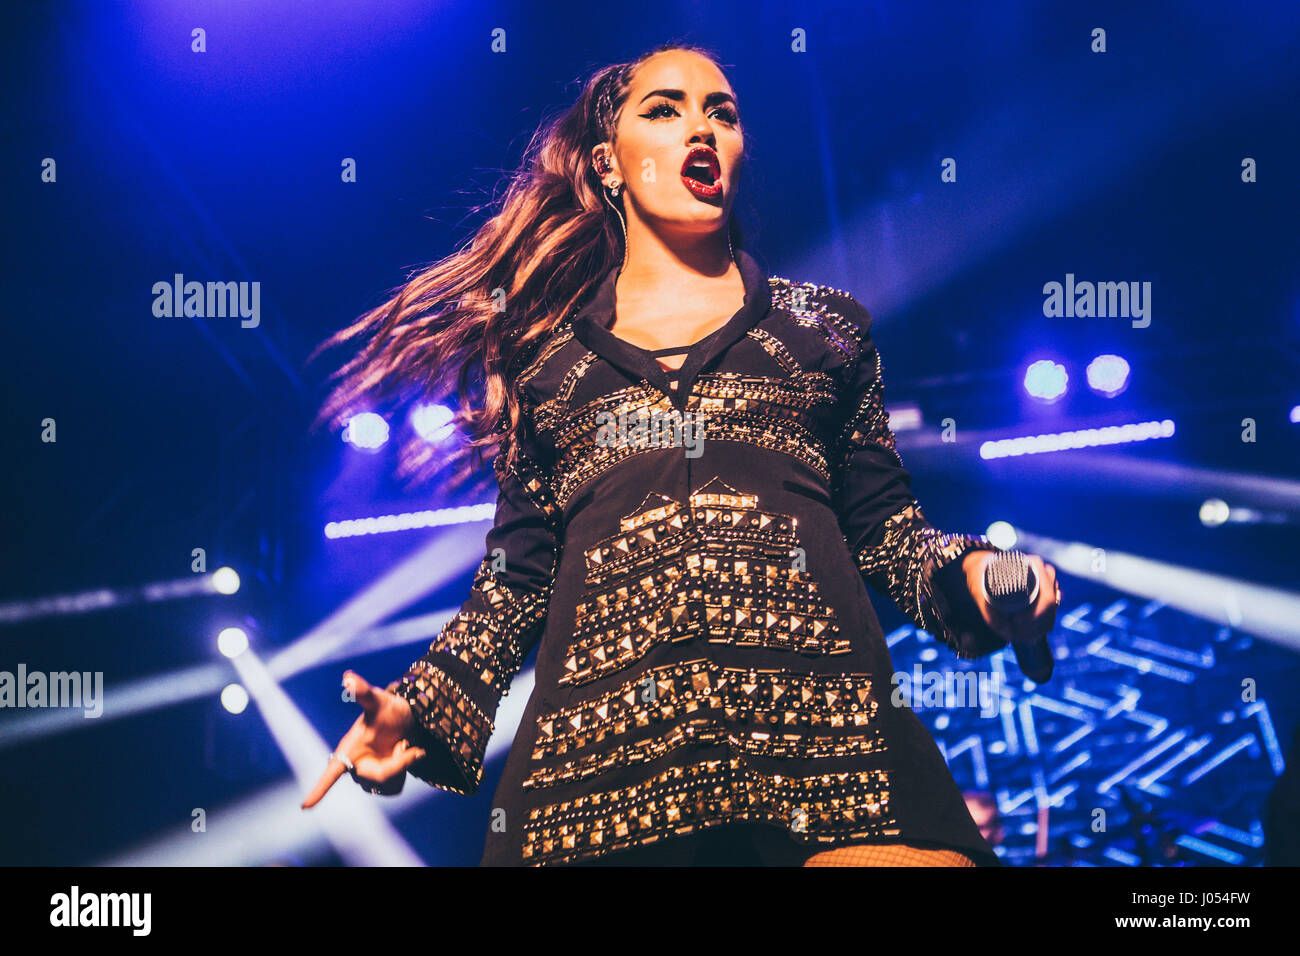 Argentine actress, singer, dancer, model, and songwriter Lali performs live at Magazzini Generali Stock Photo